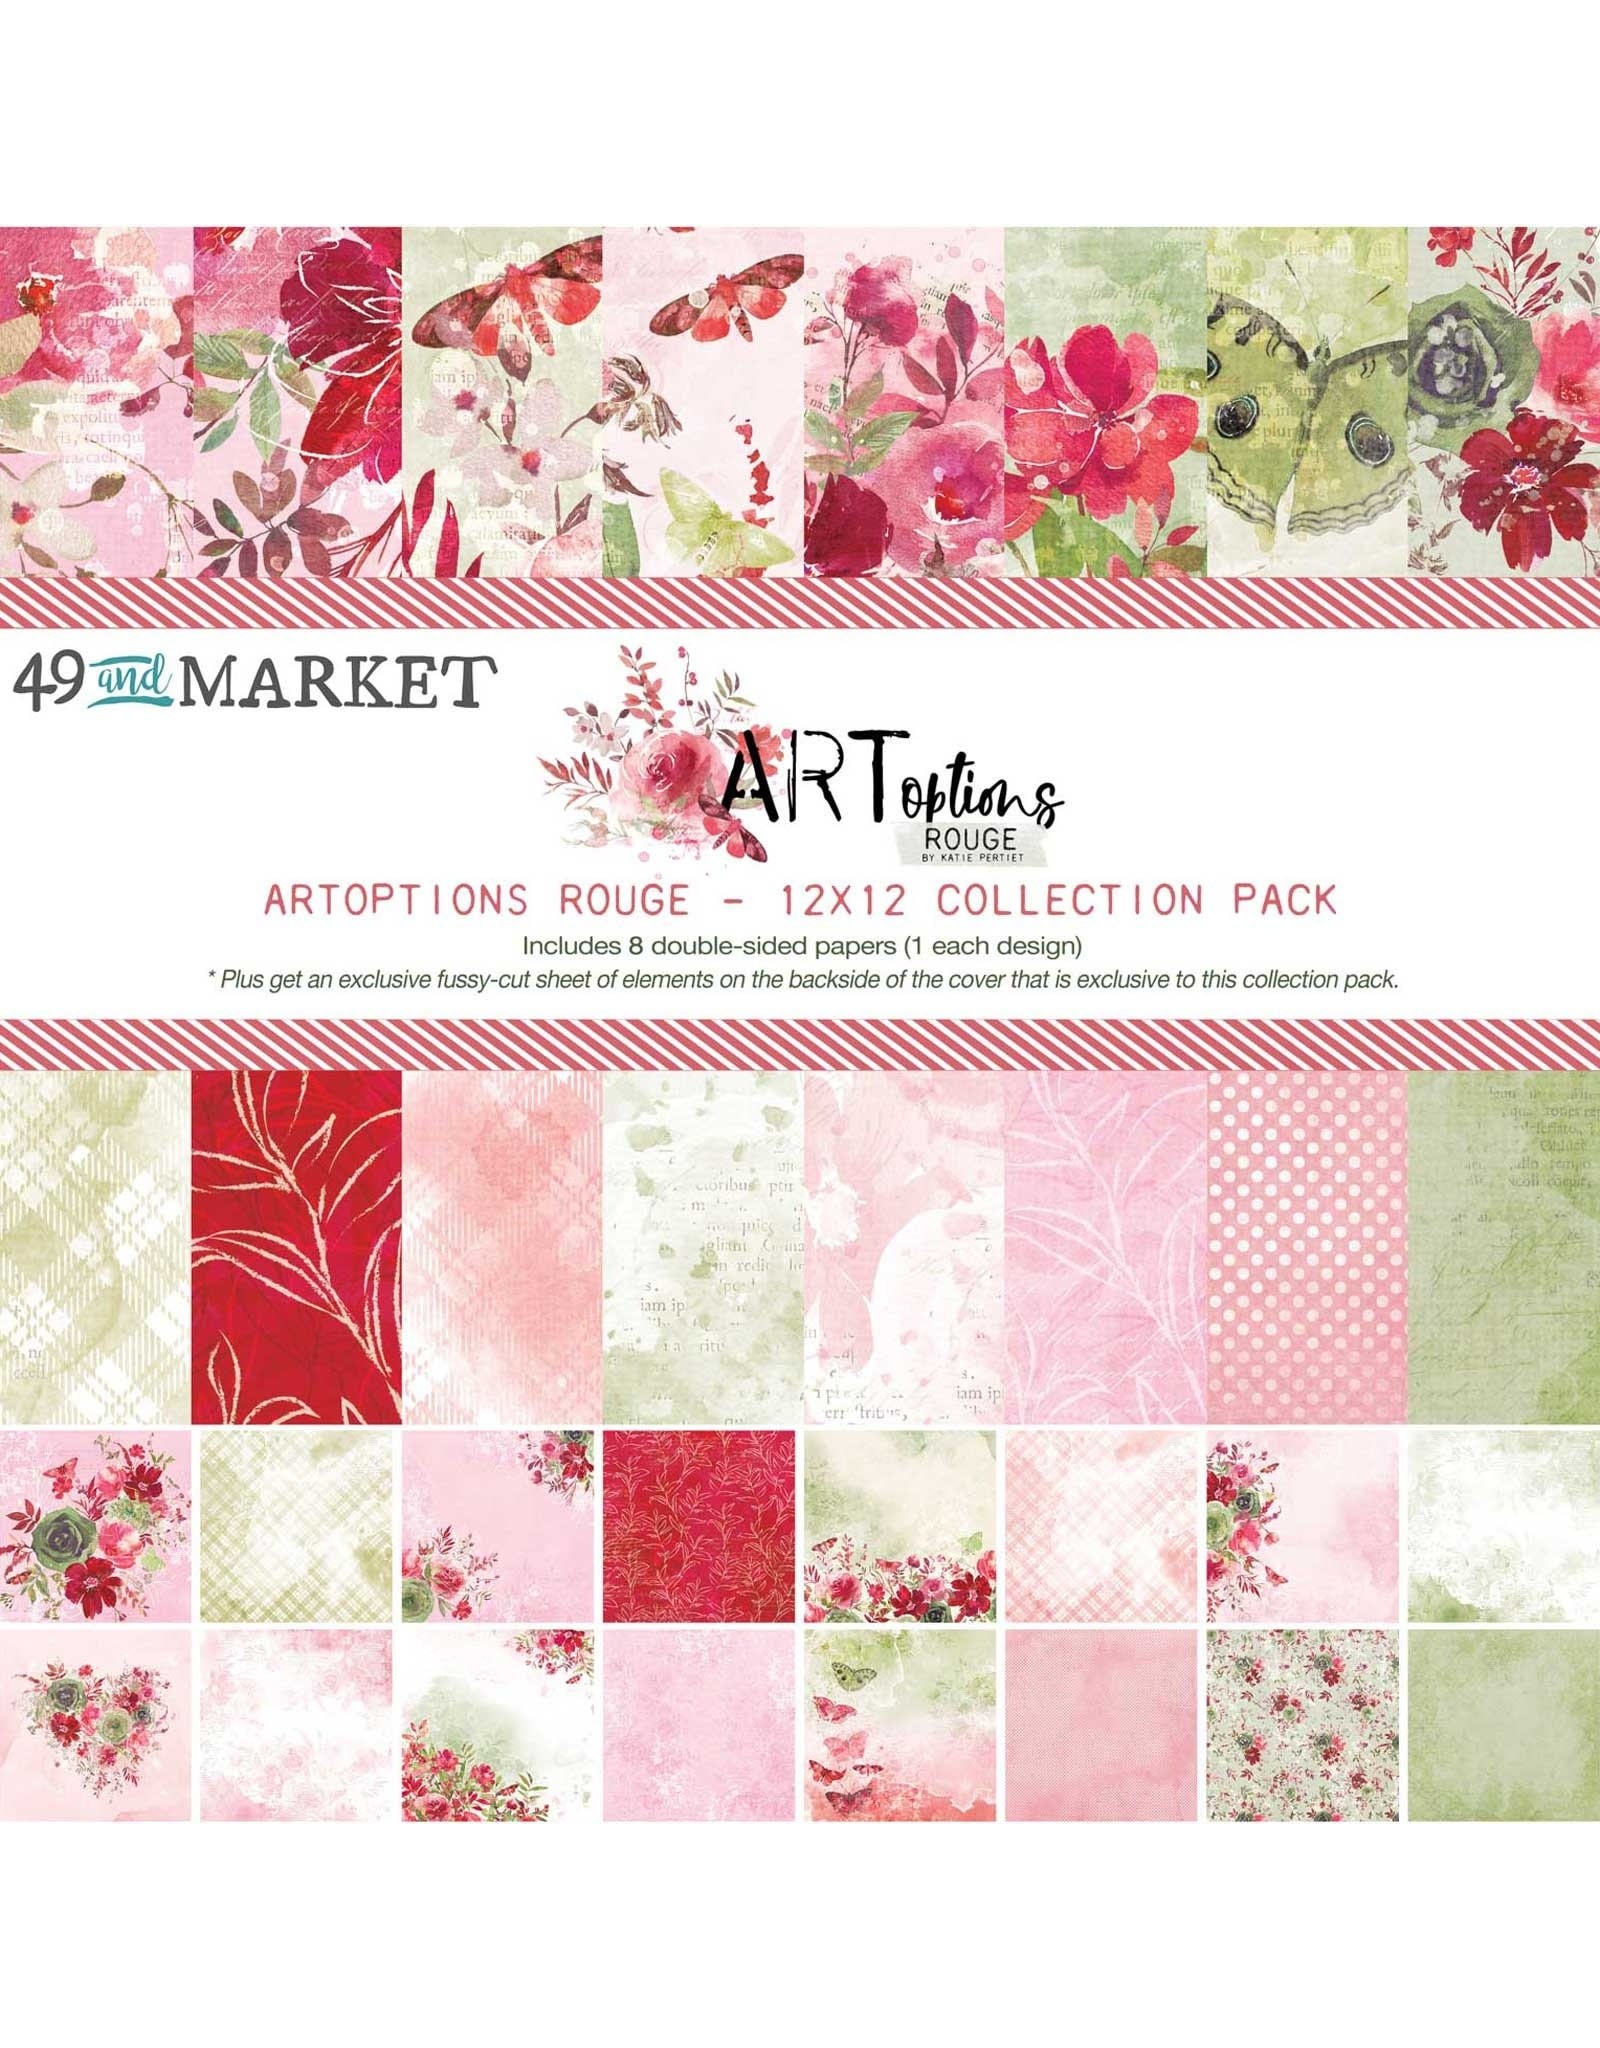 49 AND MARKET ART ROUGE COLLECTION 12X12 PACK